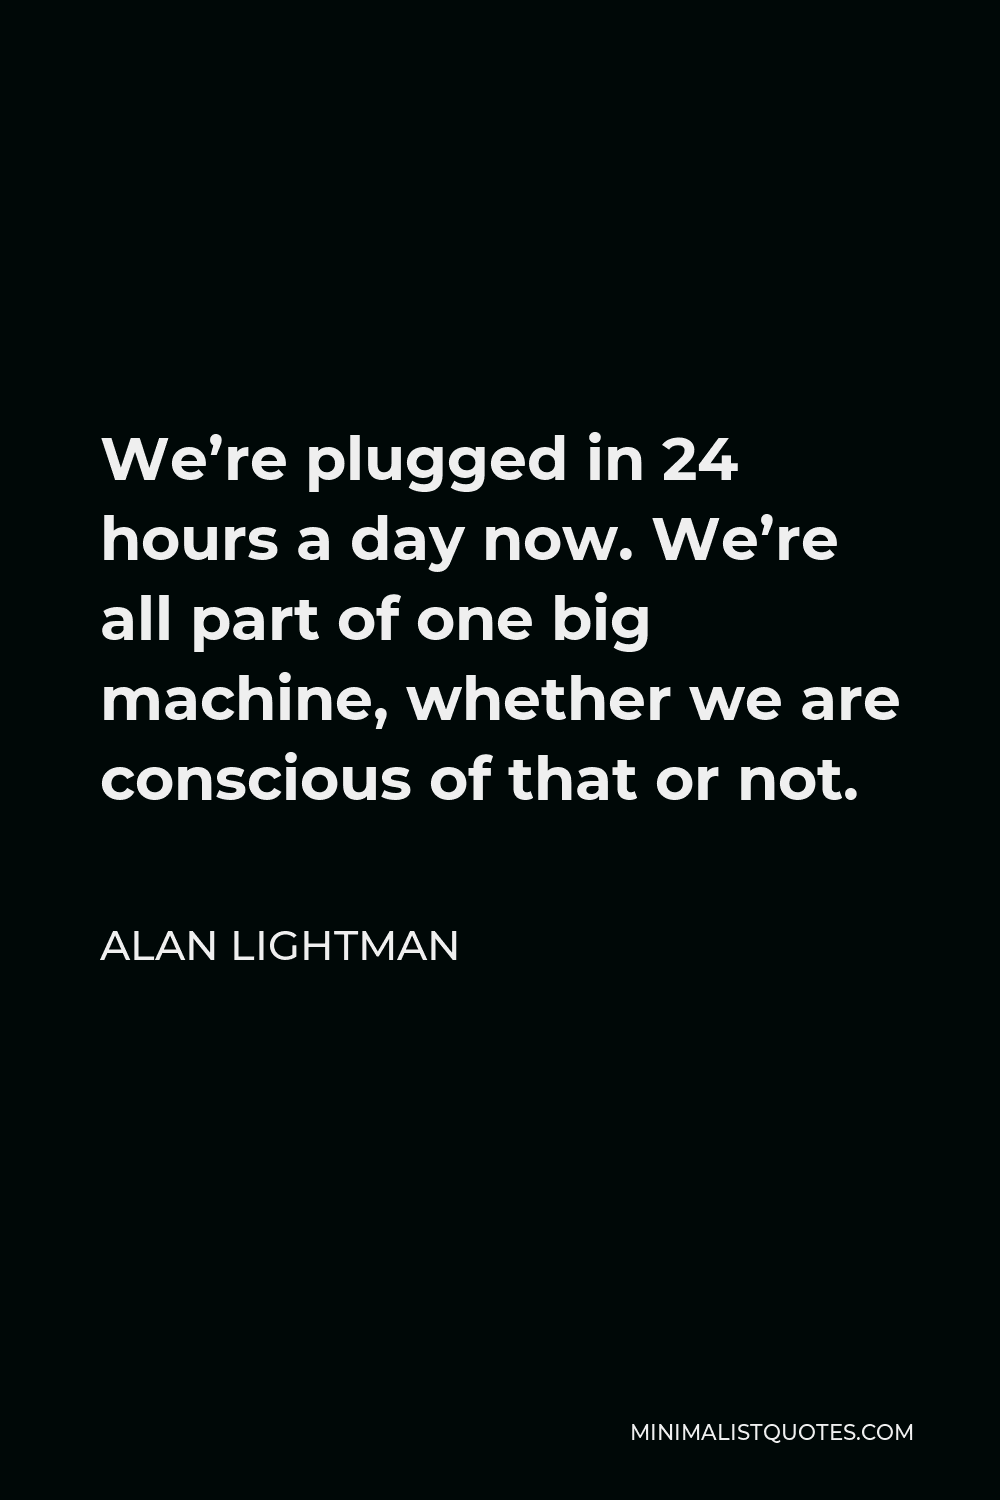 Alan Lightman Quote - We’re plugged in 24 hours a day now. We’re all part of one big machine, whether we are conscious of that or not.